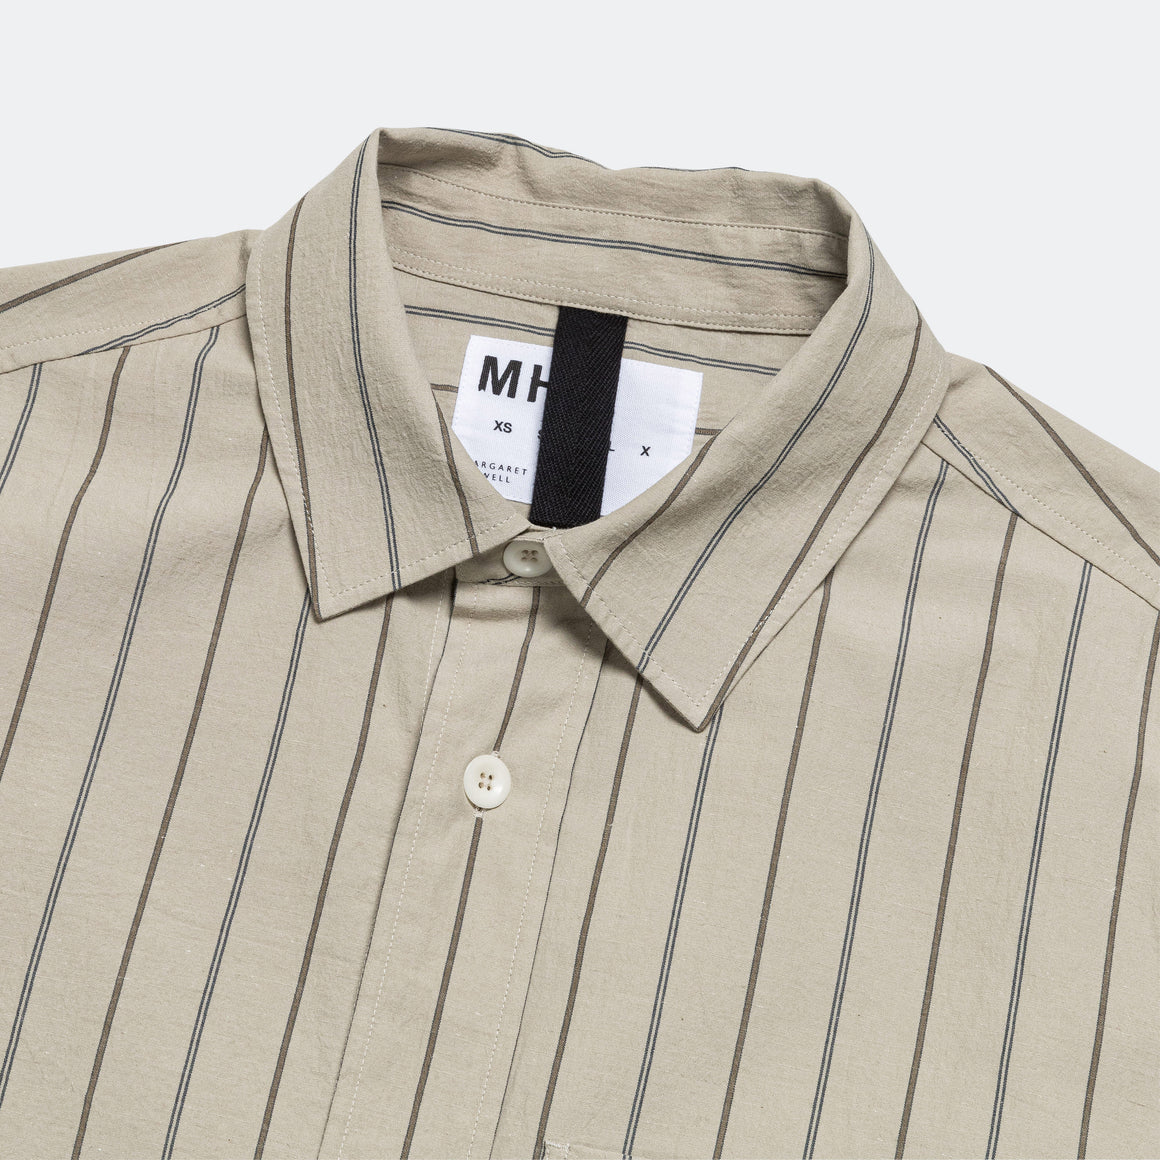 MHL. - Overall Shirt - Stone/Navy Wide Stripe Cotton Linen - UP THERE